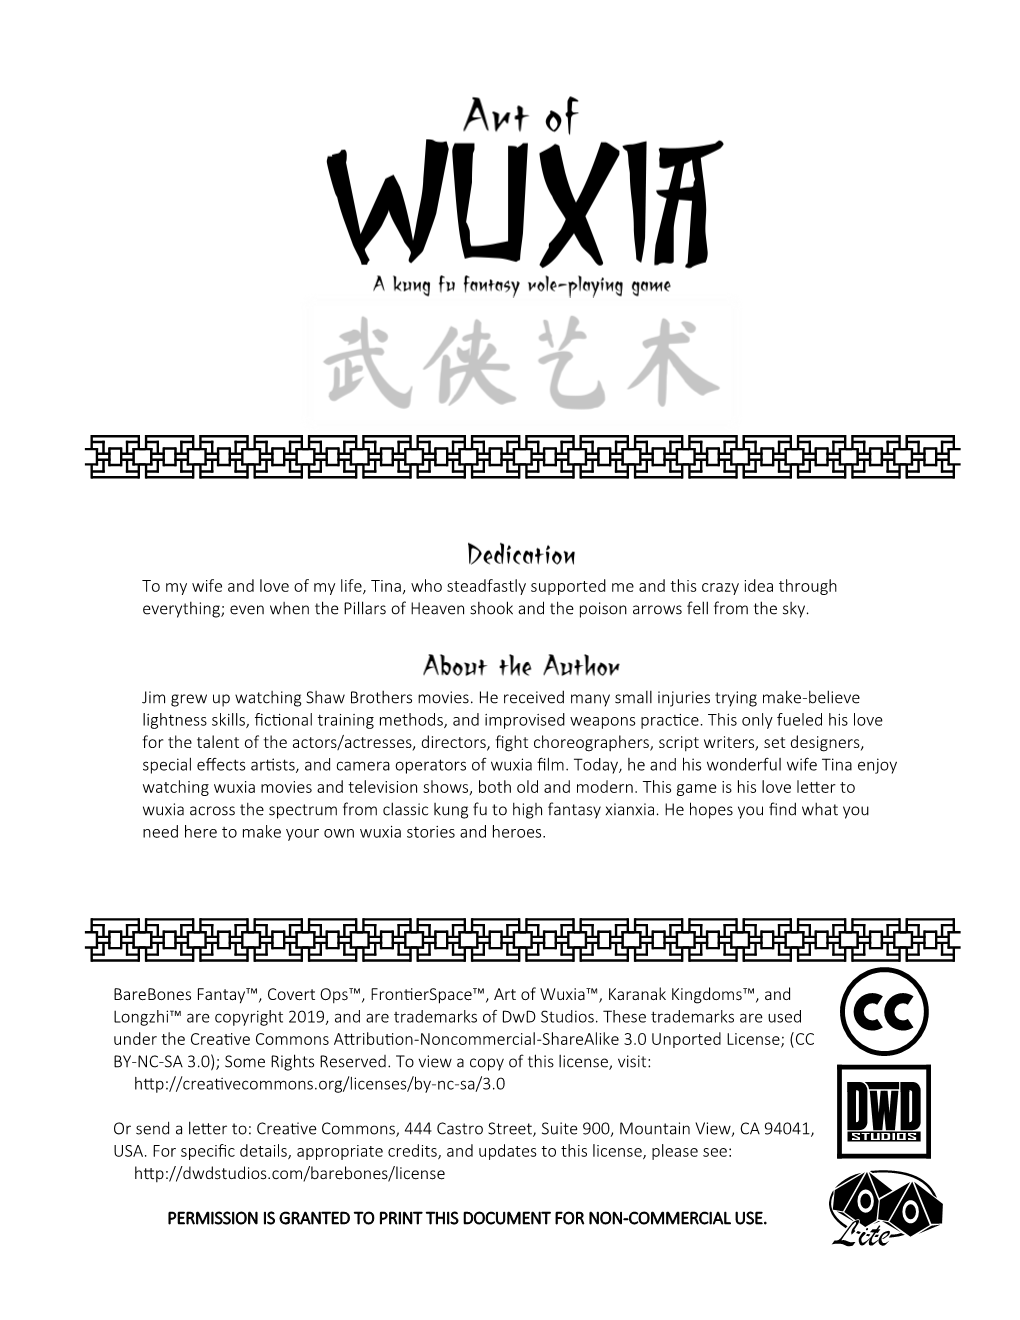 Barebones Fantay™, Covert Ops™, Frontierspace™, Art of Wuxia™, Karanak Kingdoms™, and Longzhi™ Are Copyright 2019, and Are Trademarks of Dwd Studios